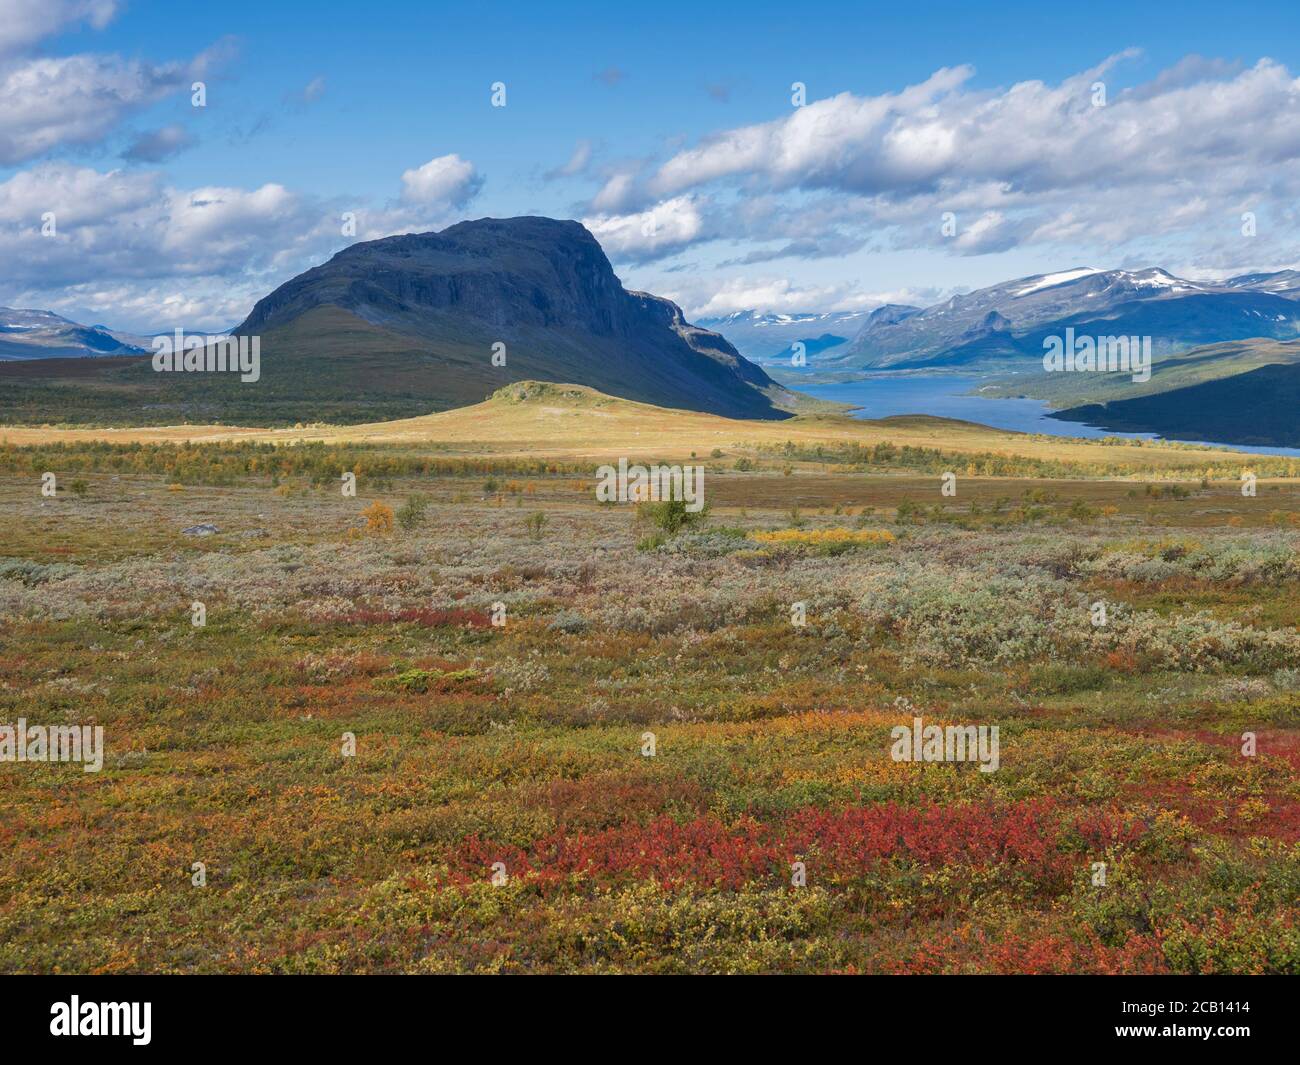 Lapland landscape with Lulealven river, snow capped mountain at Kungsleden hiking trail near Saltoluokta, Sweden. Wild nature with autumn colored Stock Photo